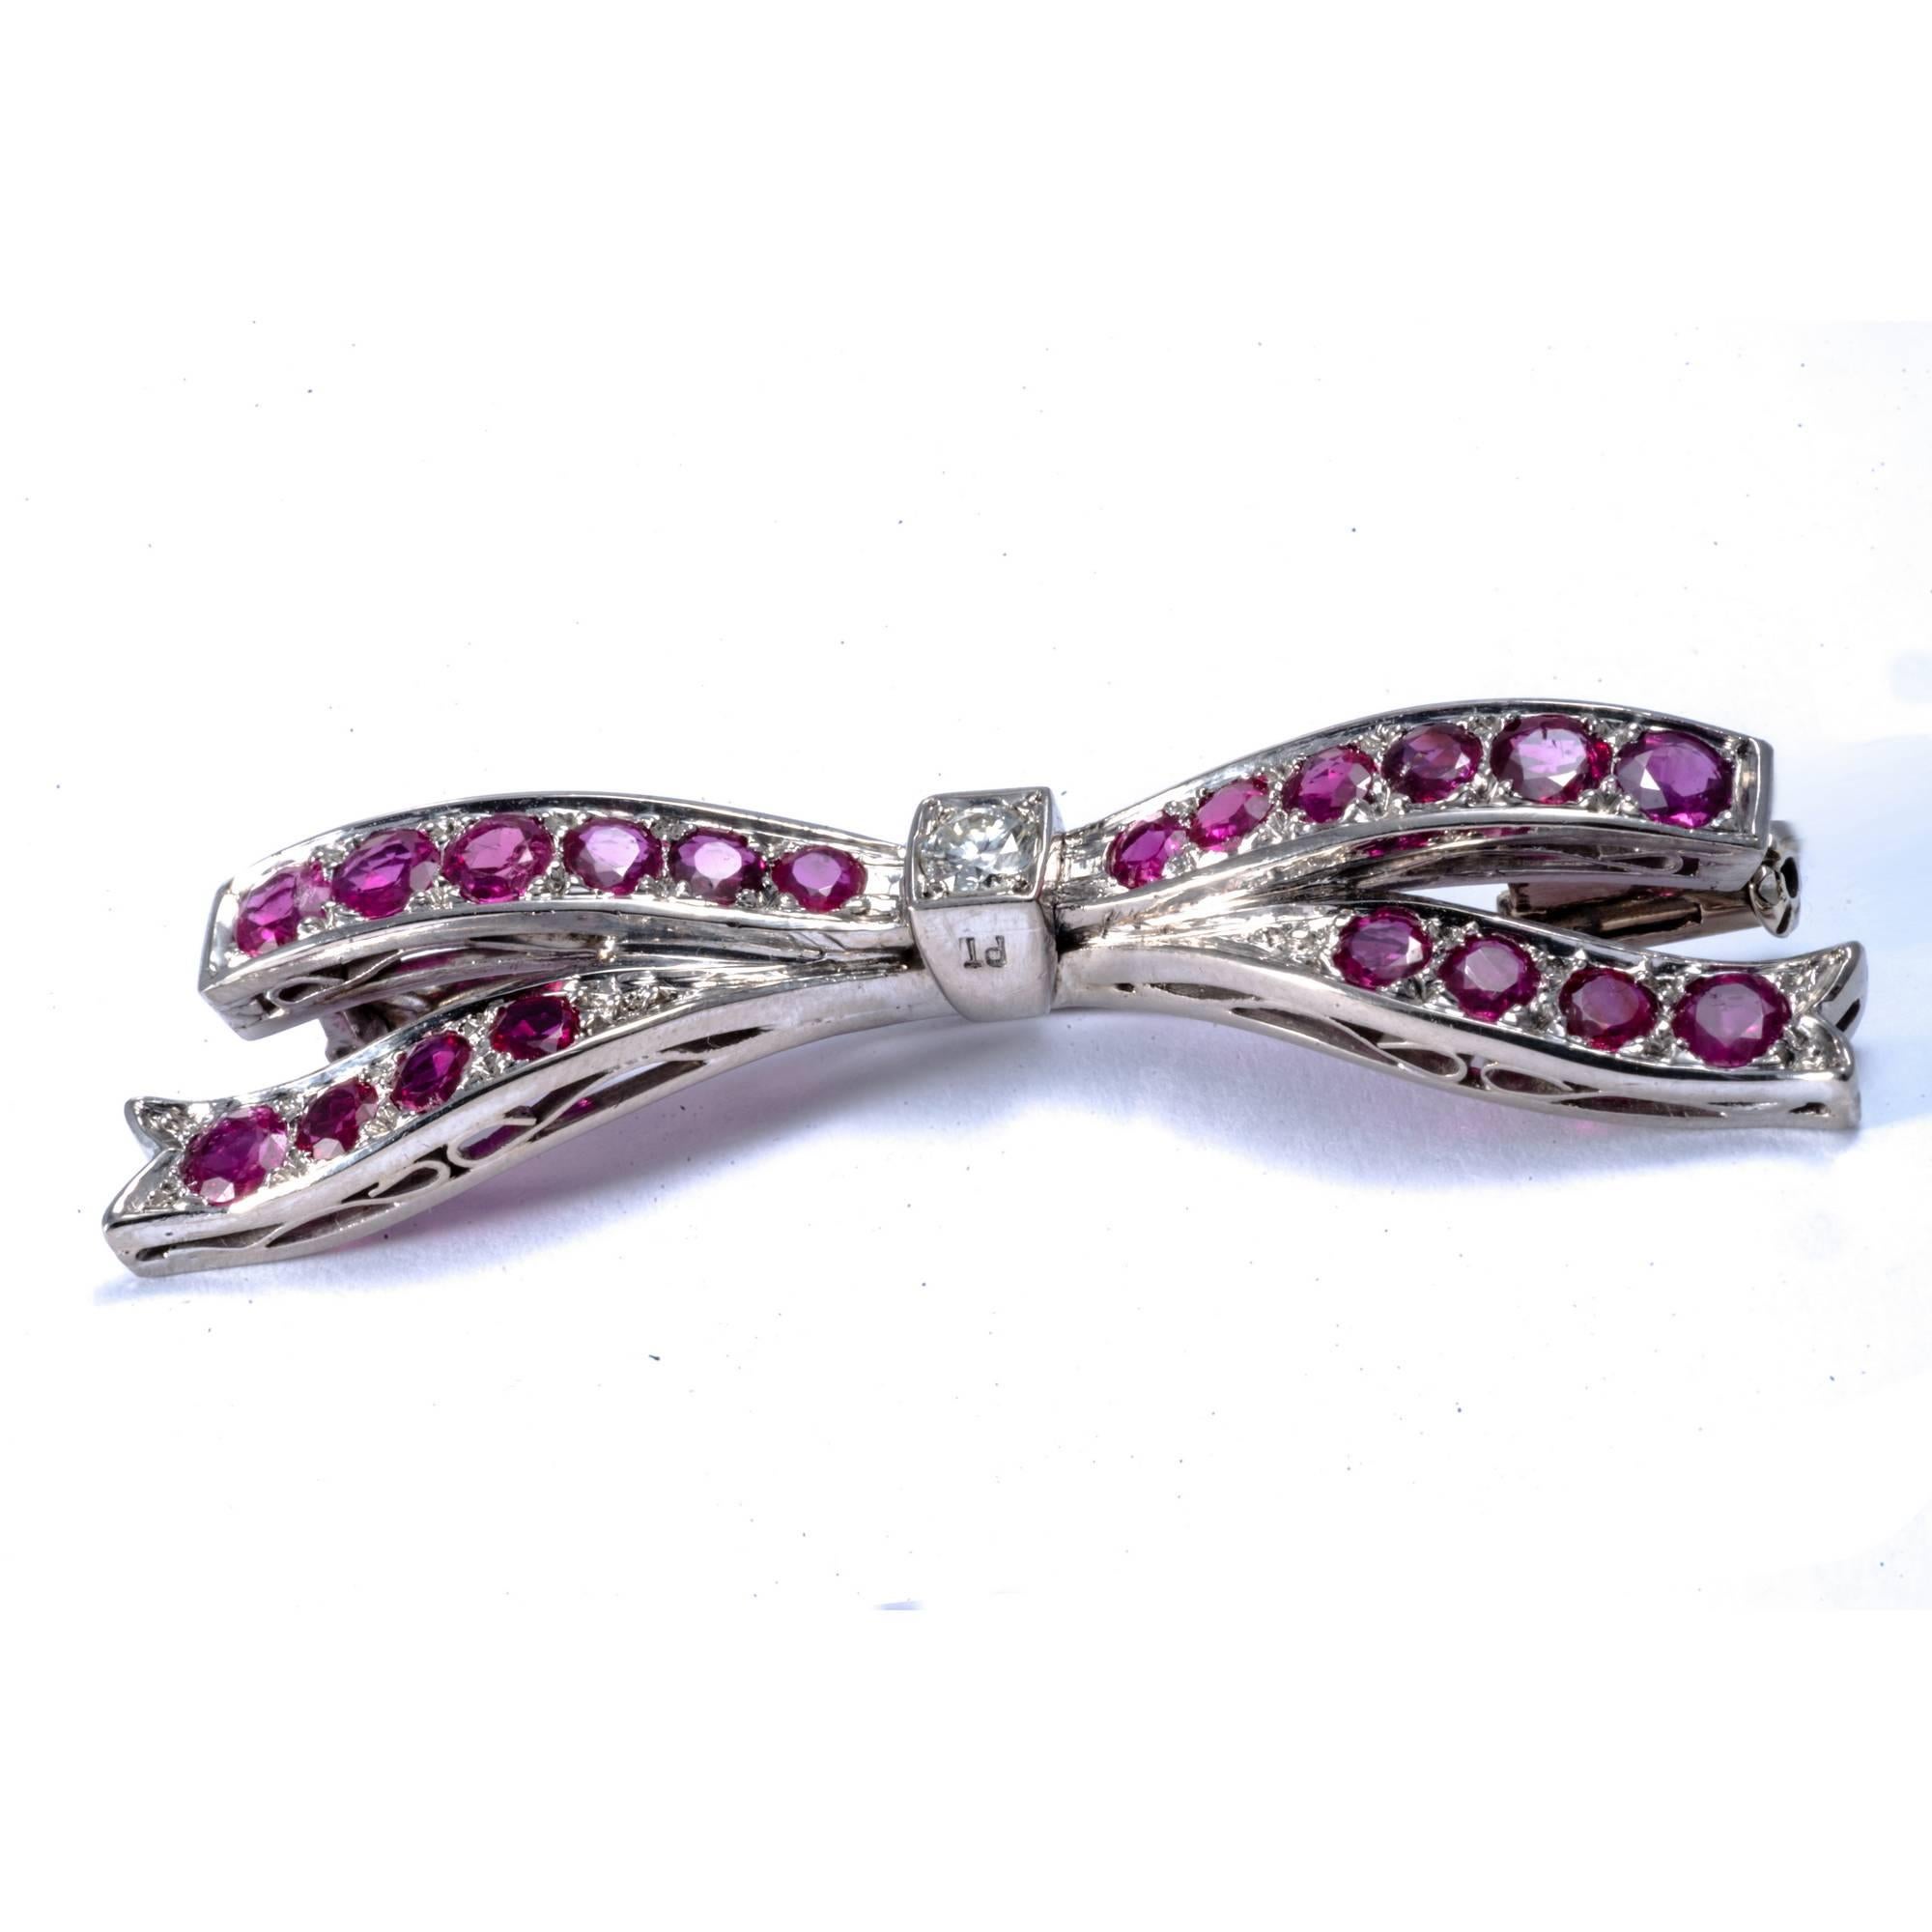 The ribbon bow, one of the favorite ornamental motifs from earlier centuries, became even more popular in the 1950's decade. This pin brooch, fully hand made in platinum, exemplifies the elegant attitude of the period and can be wore as a necklace